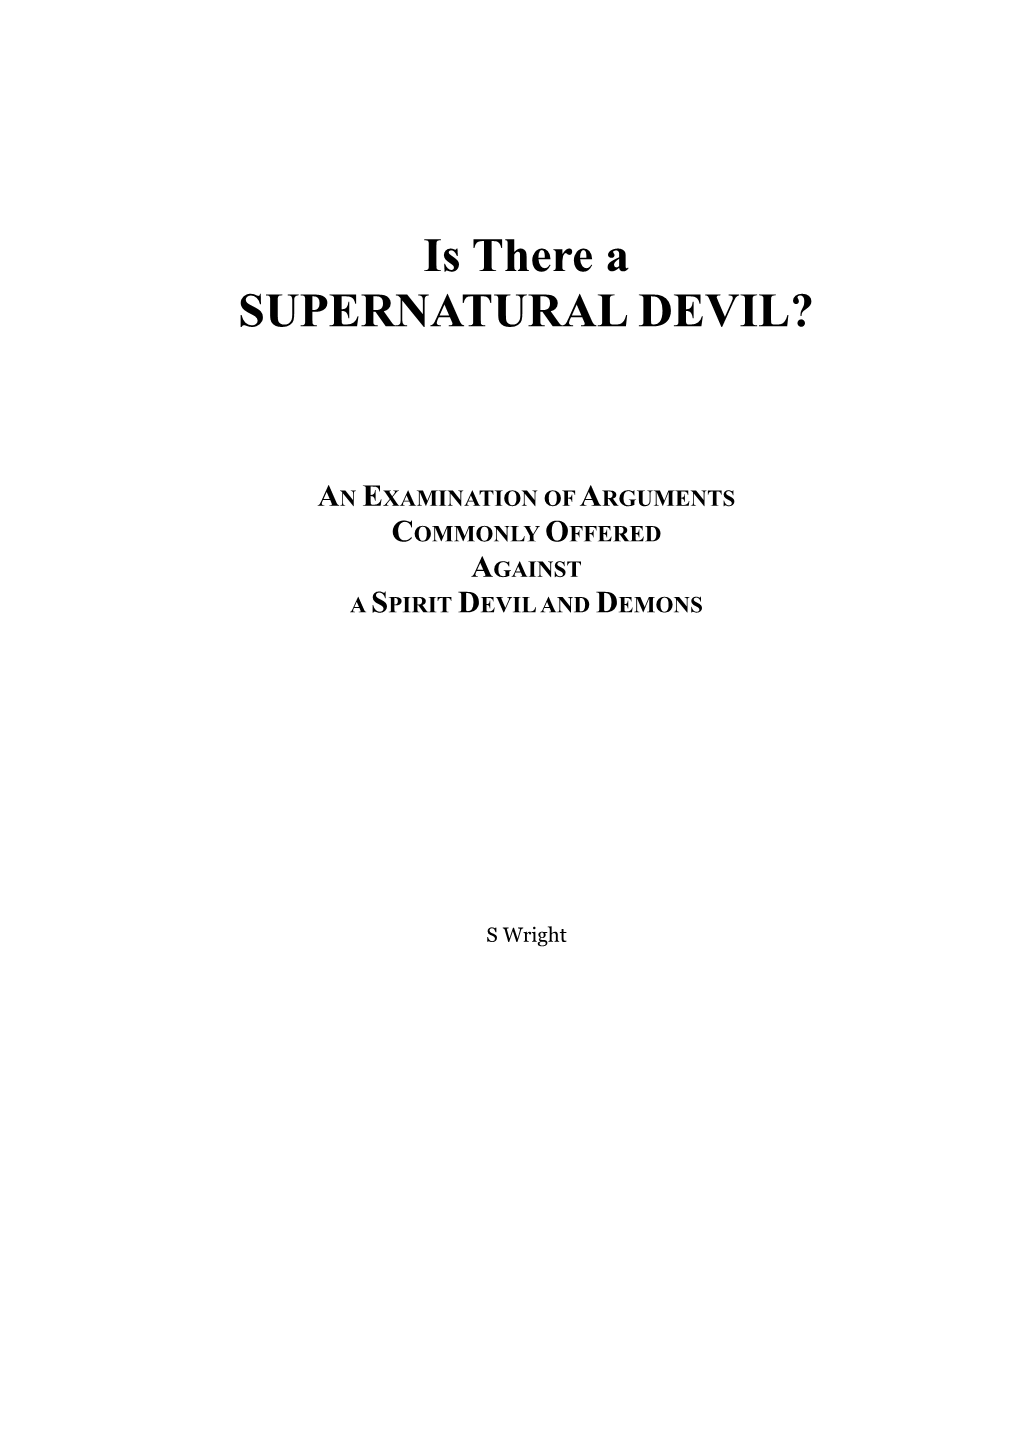 Is There a SUPERNATURAL DEVIL?